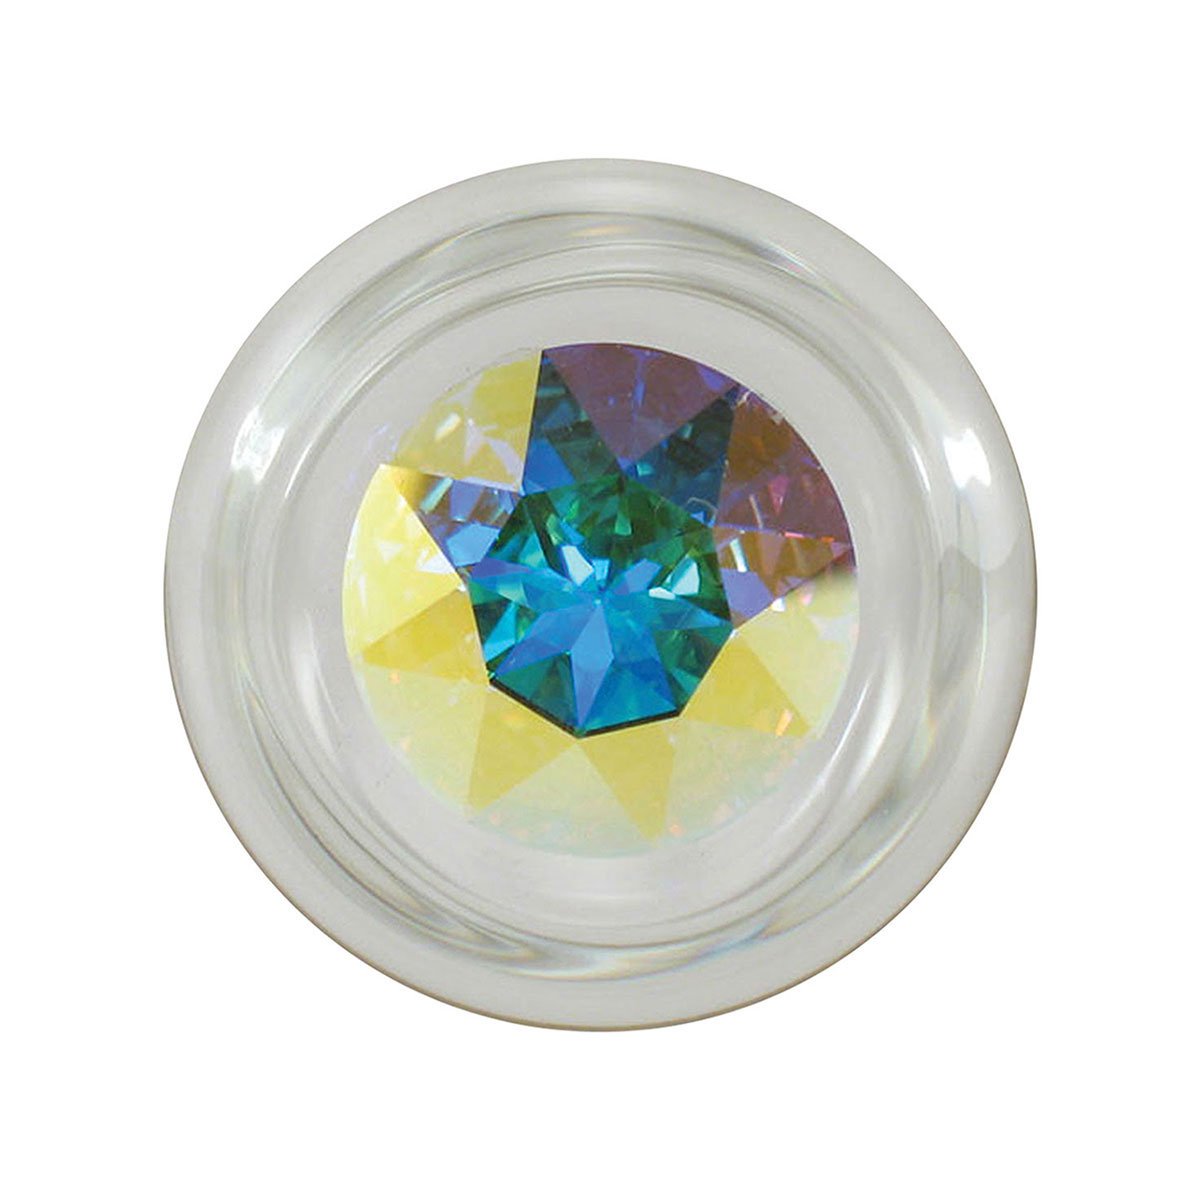 Crystal Delights Small Clear Plug - Aurora Borealis - Buy At Luxury Toy X - Free 3-Day Shipping